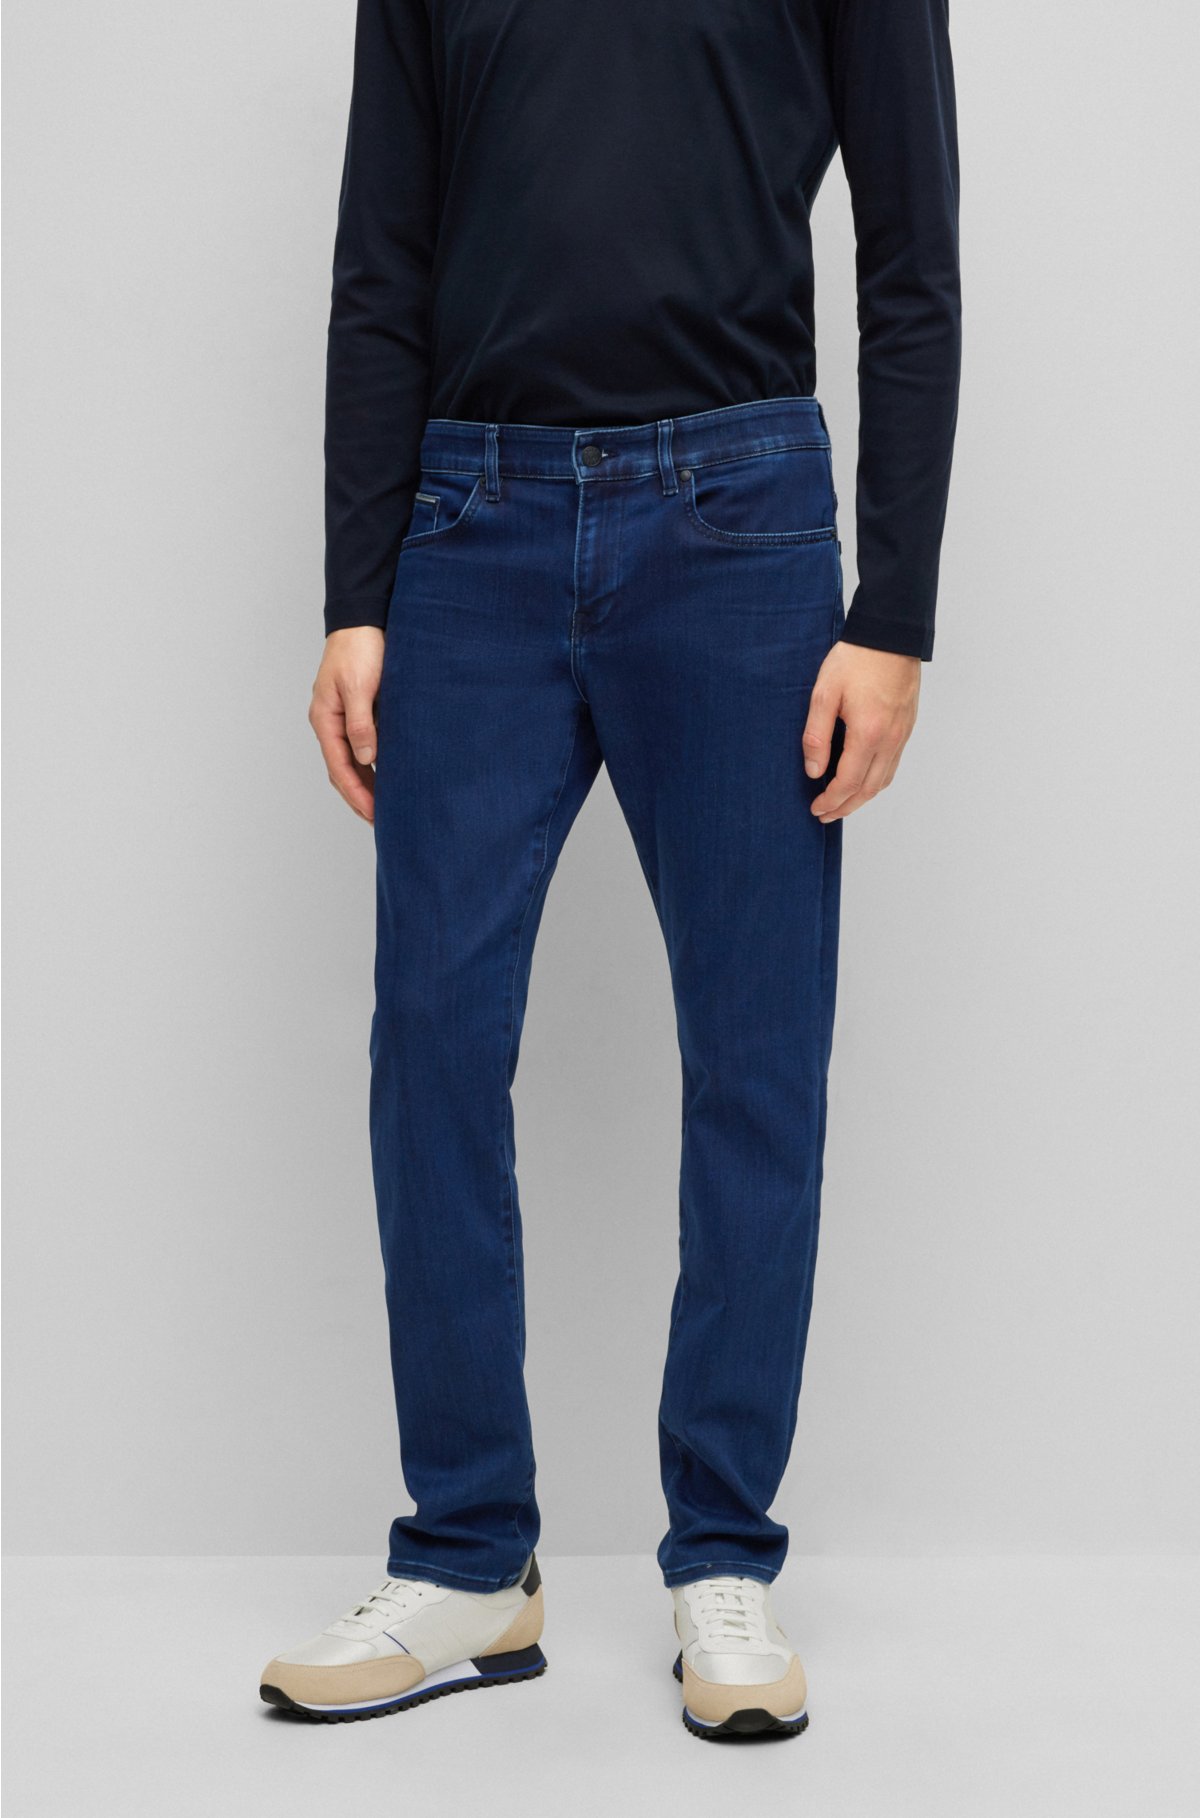 BOSS - Slim-fit denim jeans blue in satin-touch